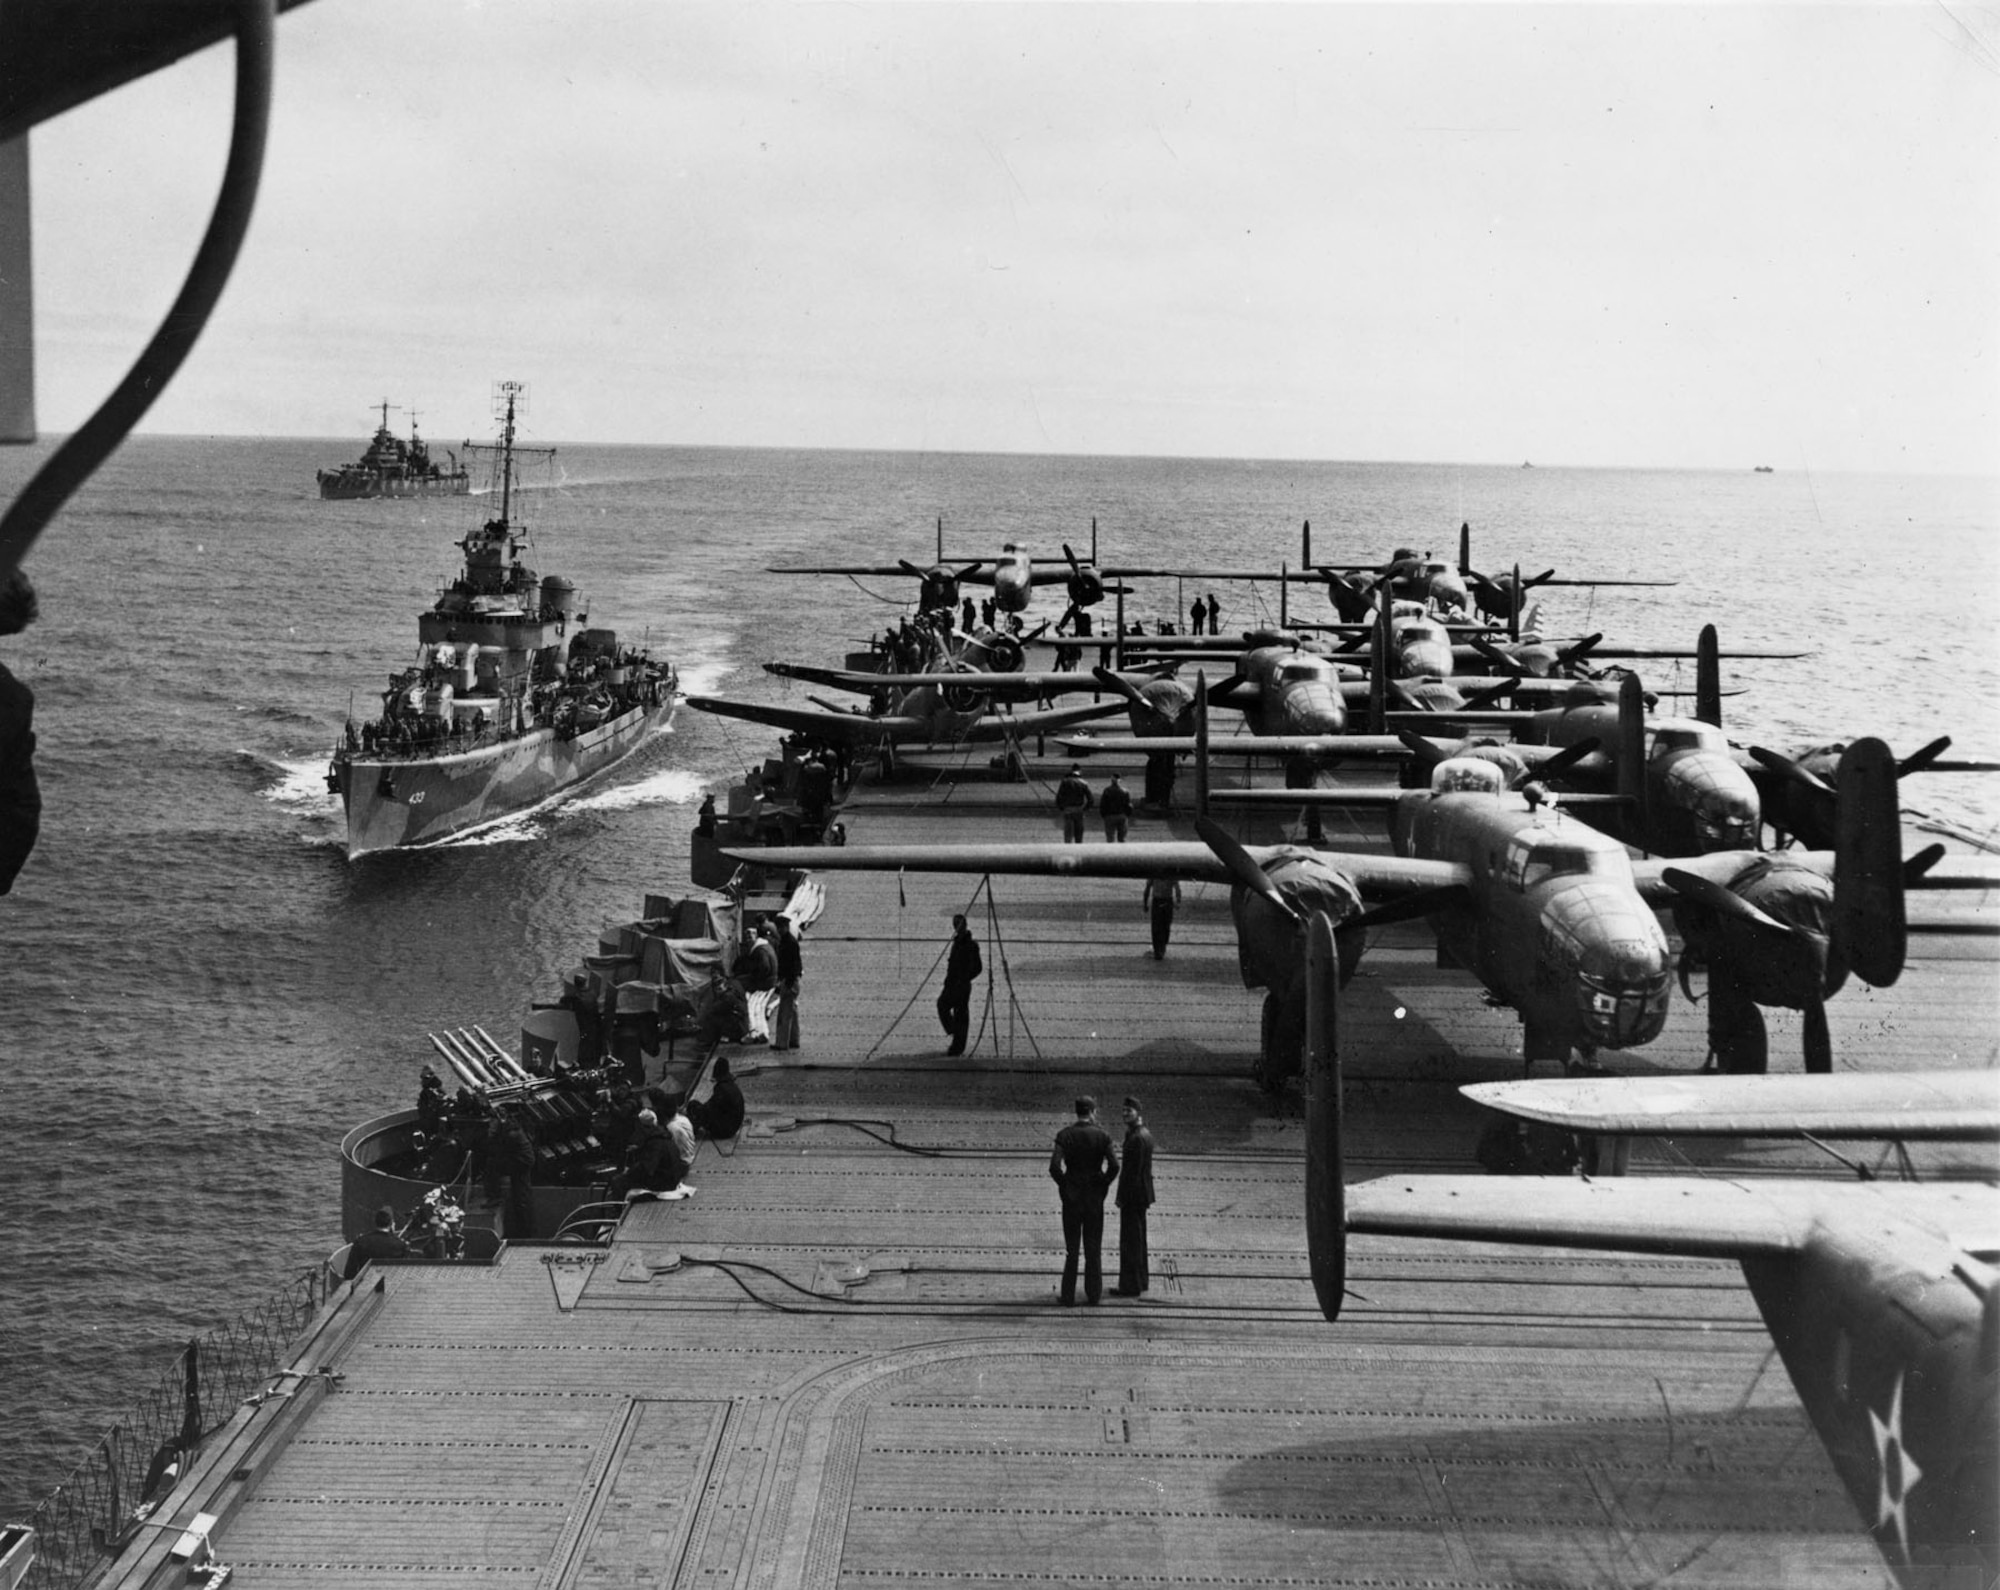 The aircraft carrier Hornet had 16 AAF B-25s on deck, ready for the Tokyo
Raid. (U.S. Air Force photo)
